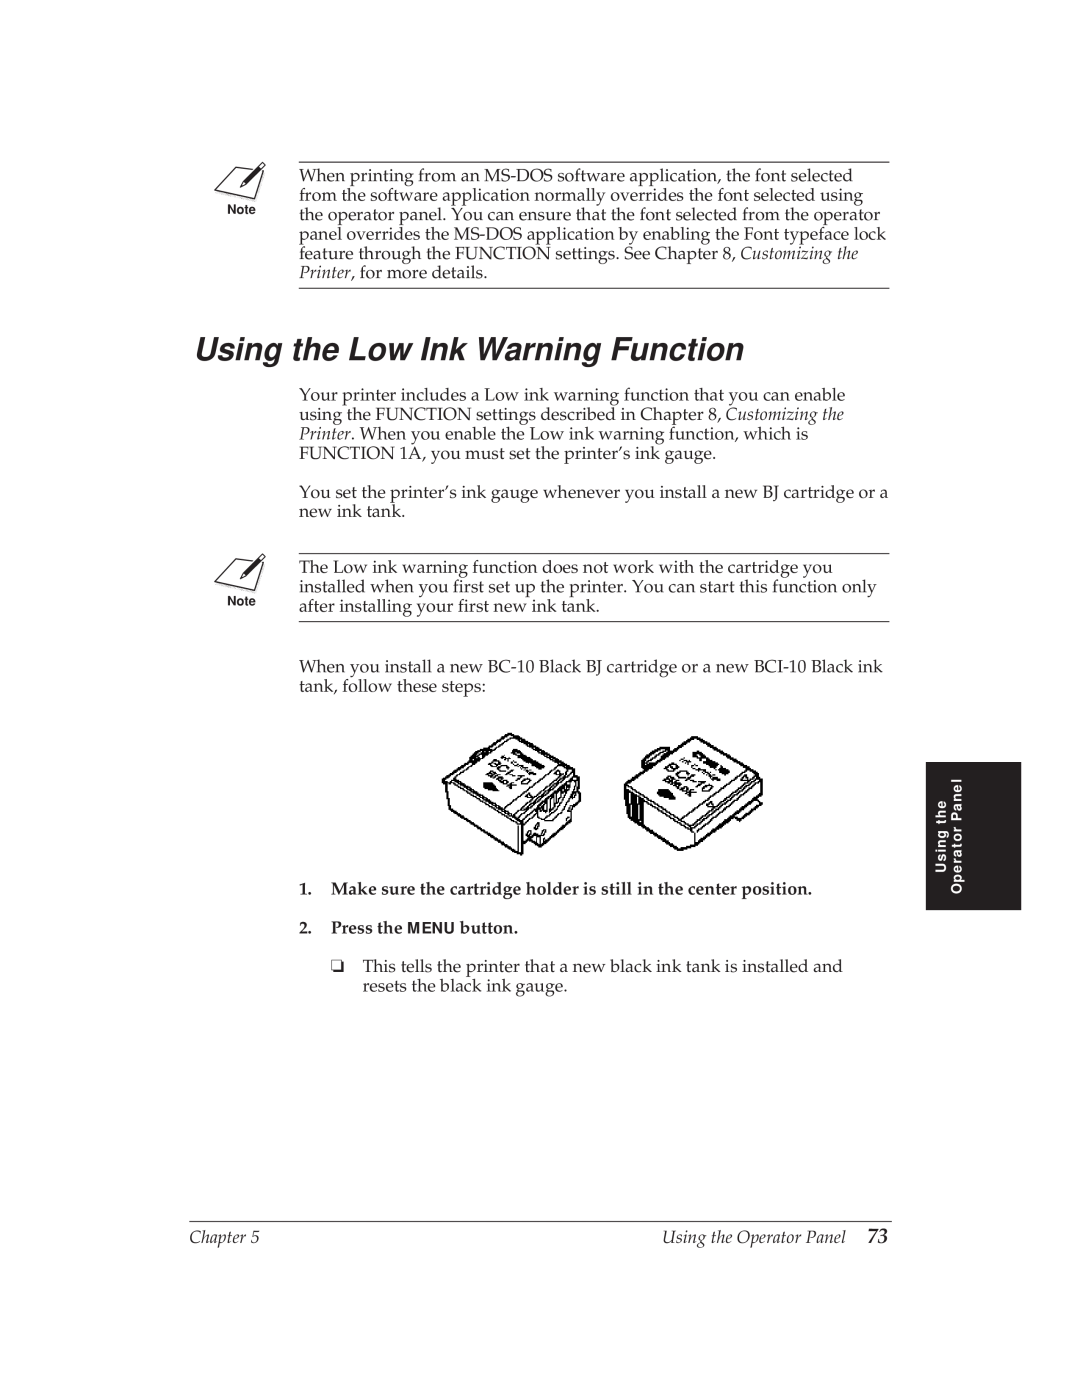 Canon BJ-30 manual Using the Low Ink Warning Function, Make sure the cartridge holder is still in the center position 